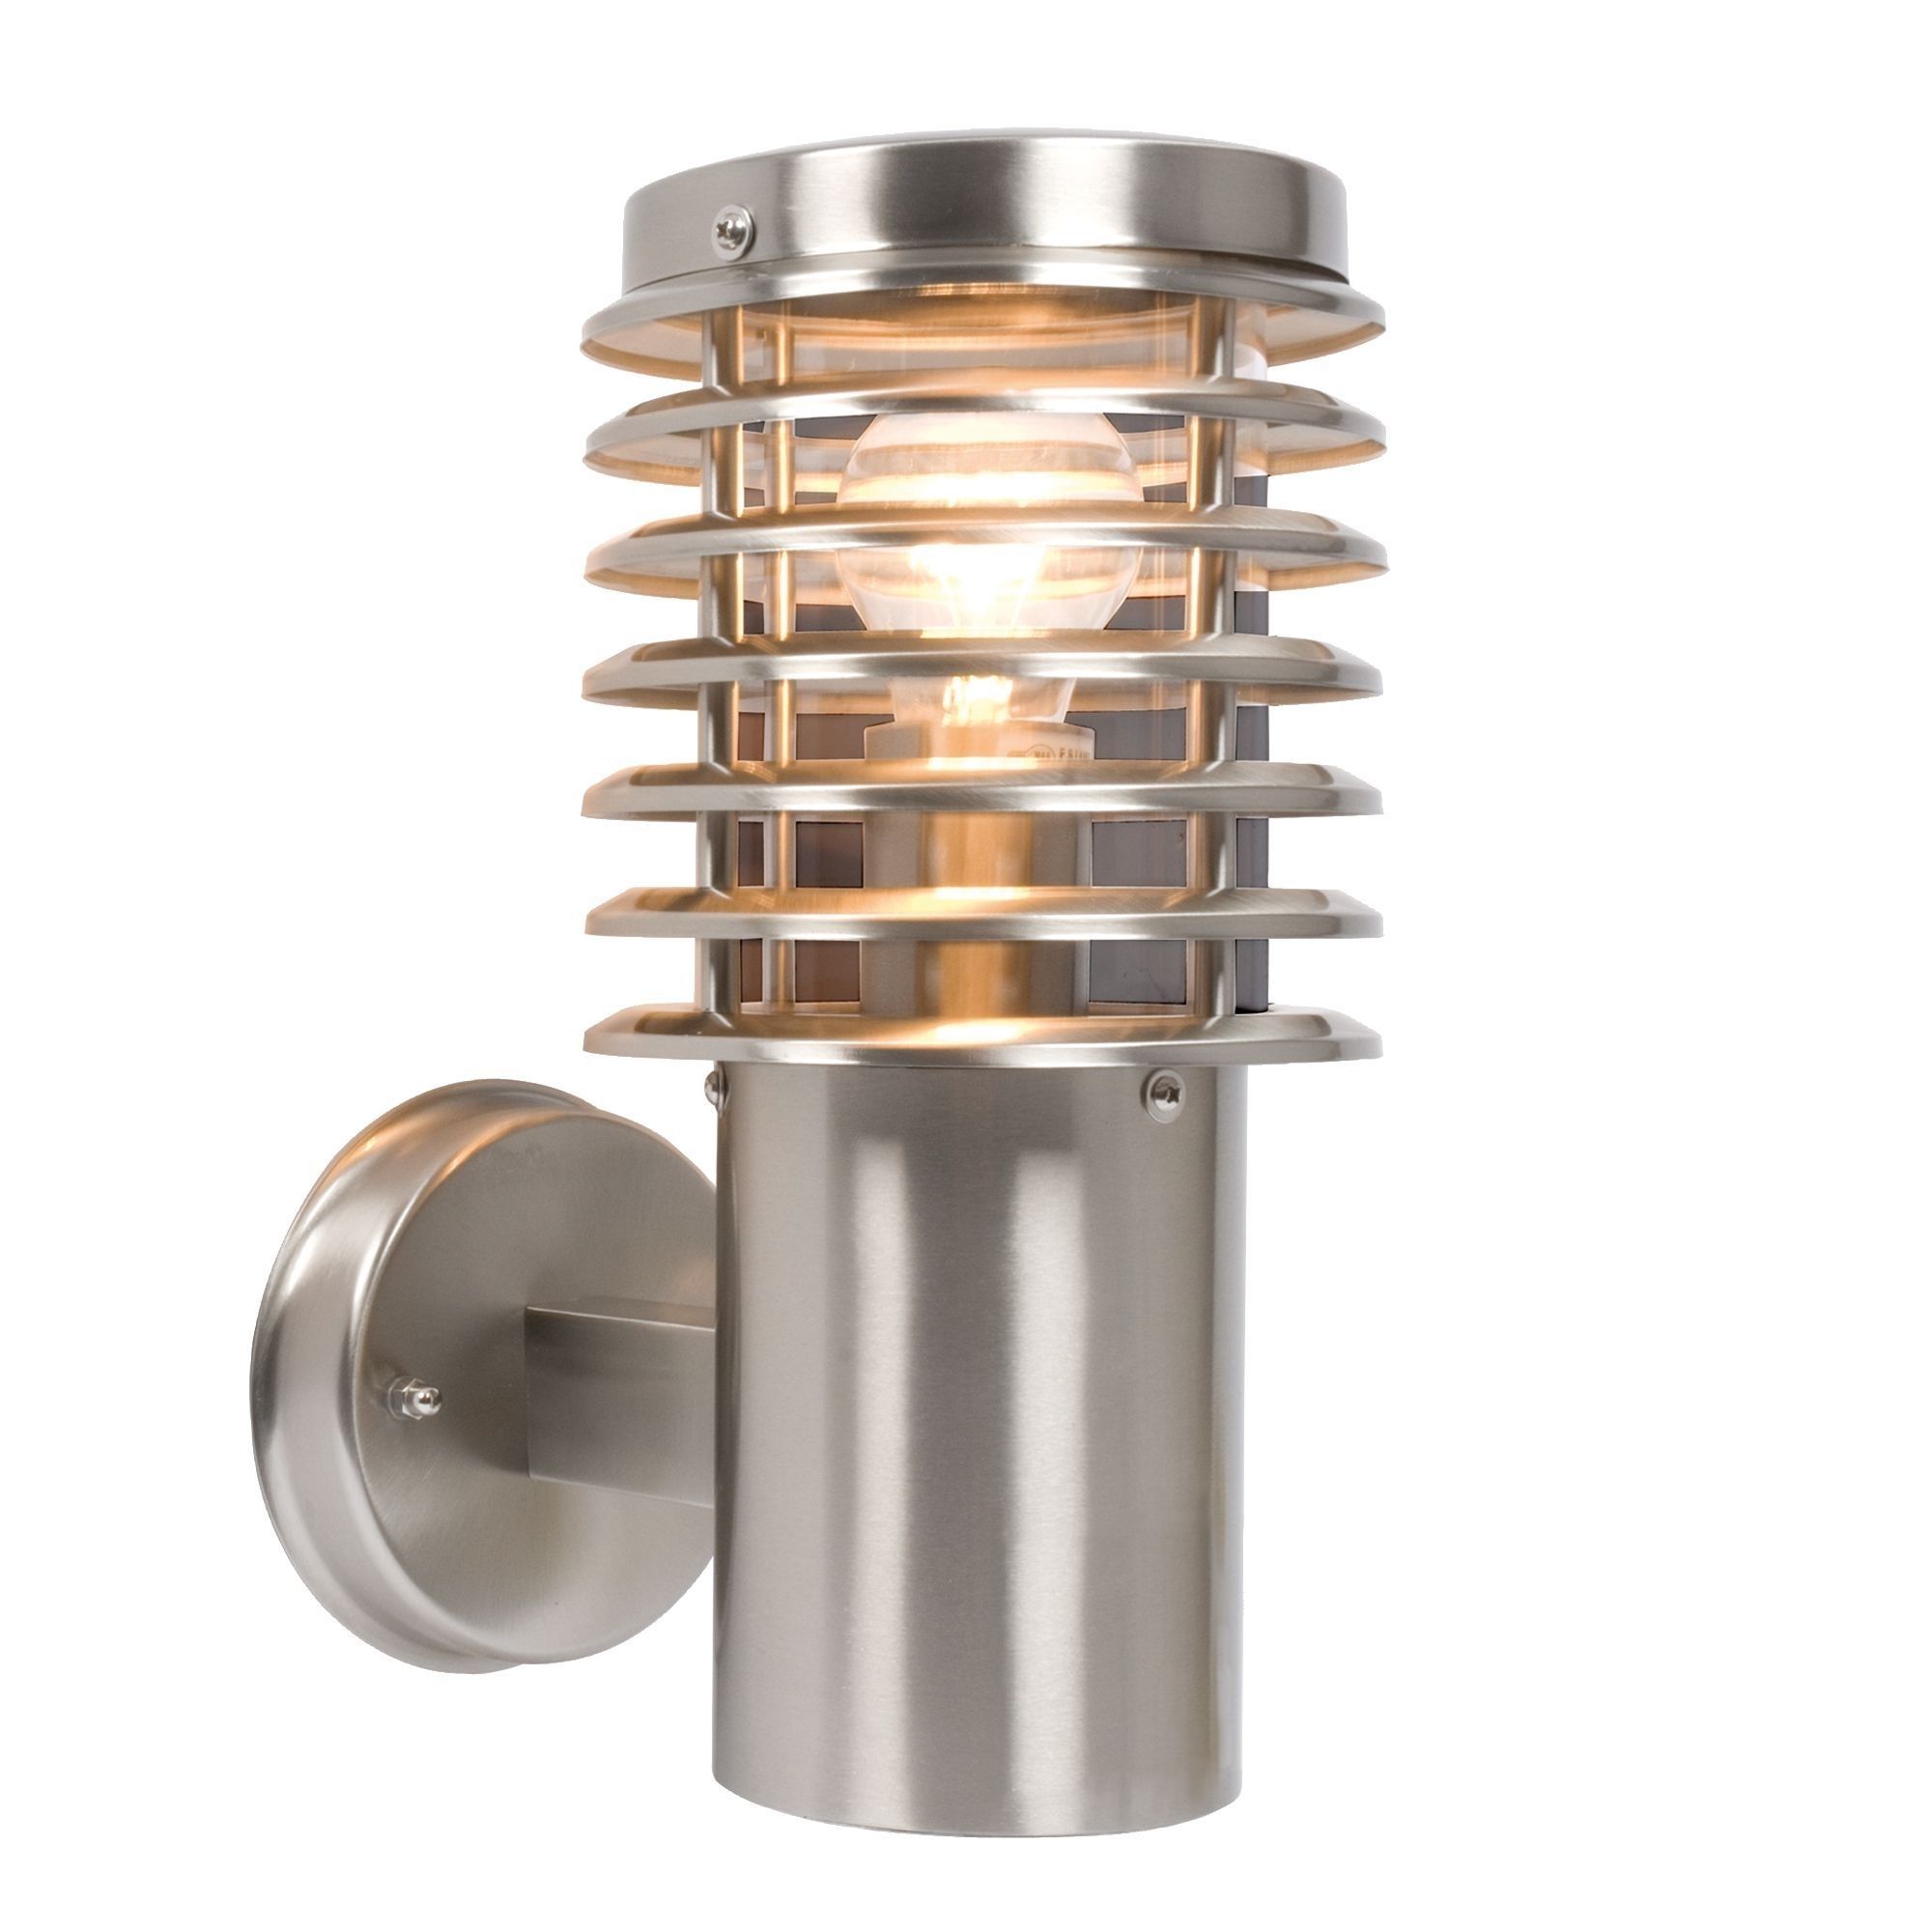 Clipper Stainless Steel Mains Powered External Wall Light | Lights For Outdoor Wall Lighting At B&amp;q (View 3 of 15)